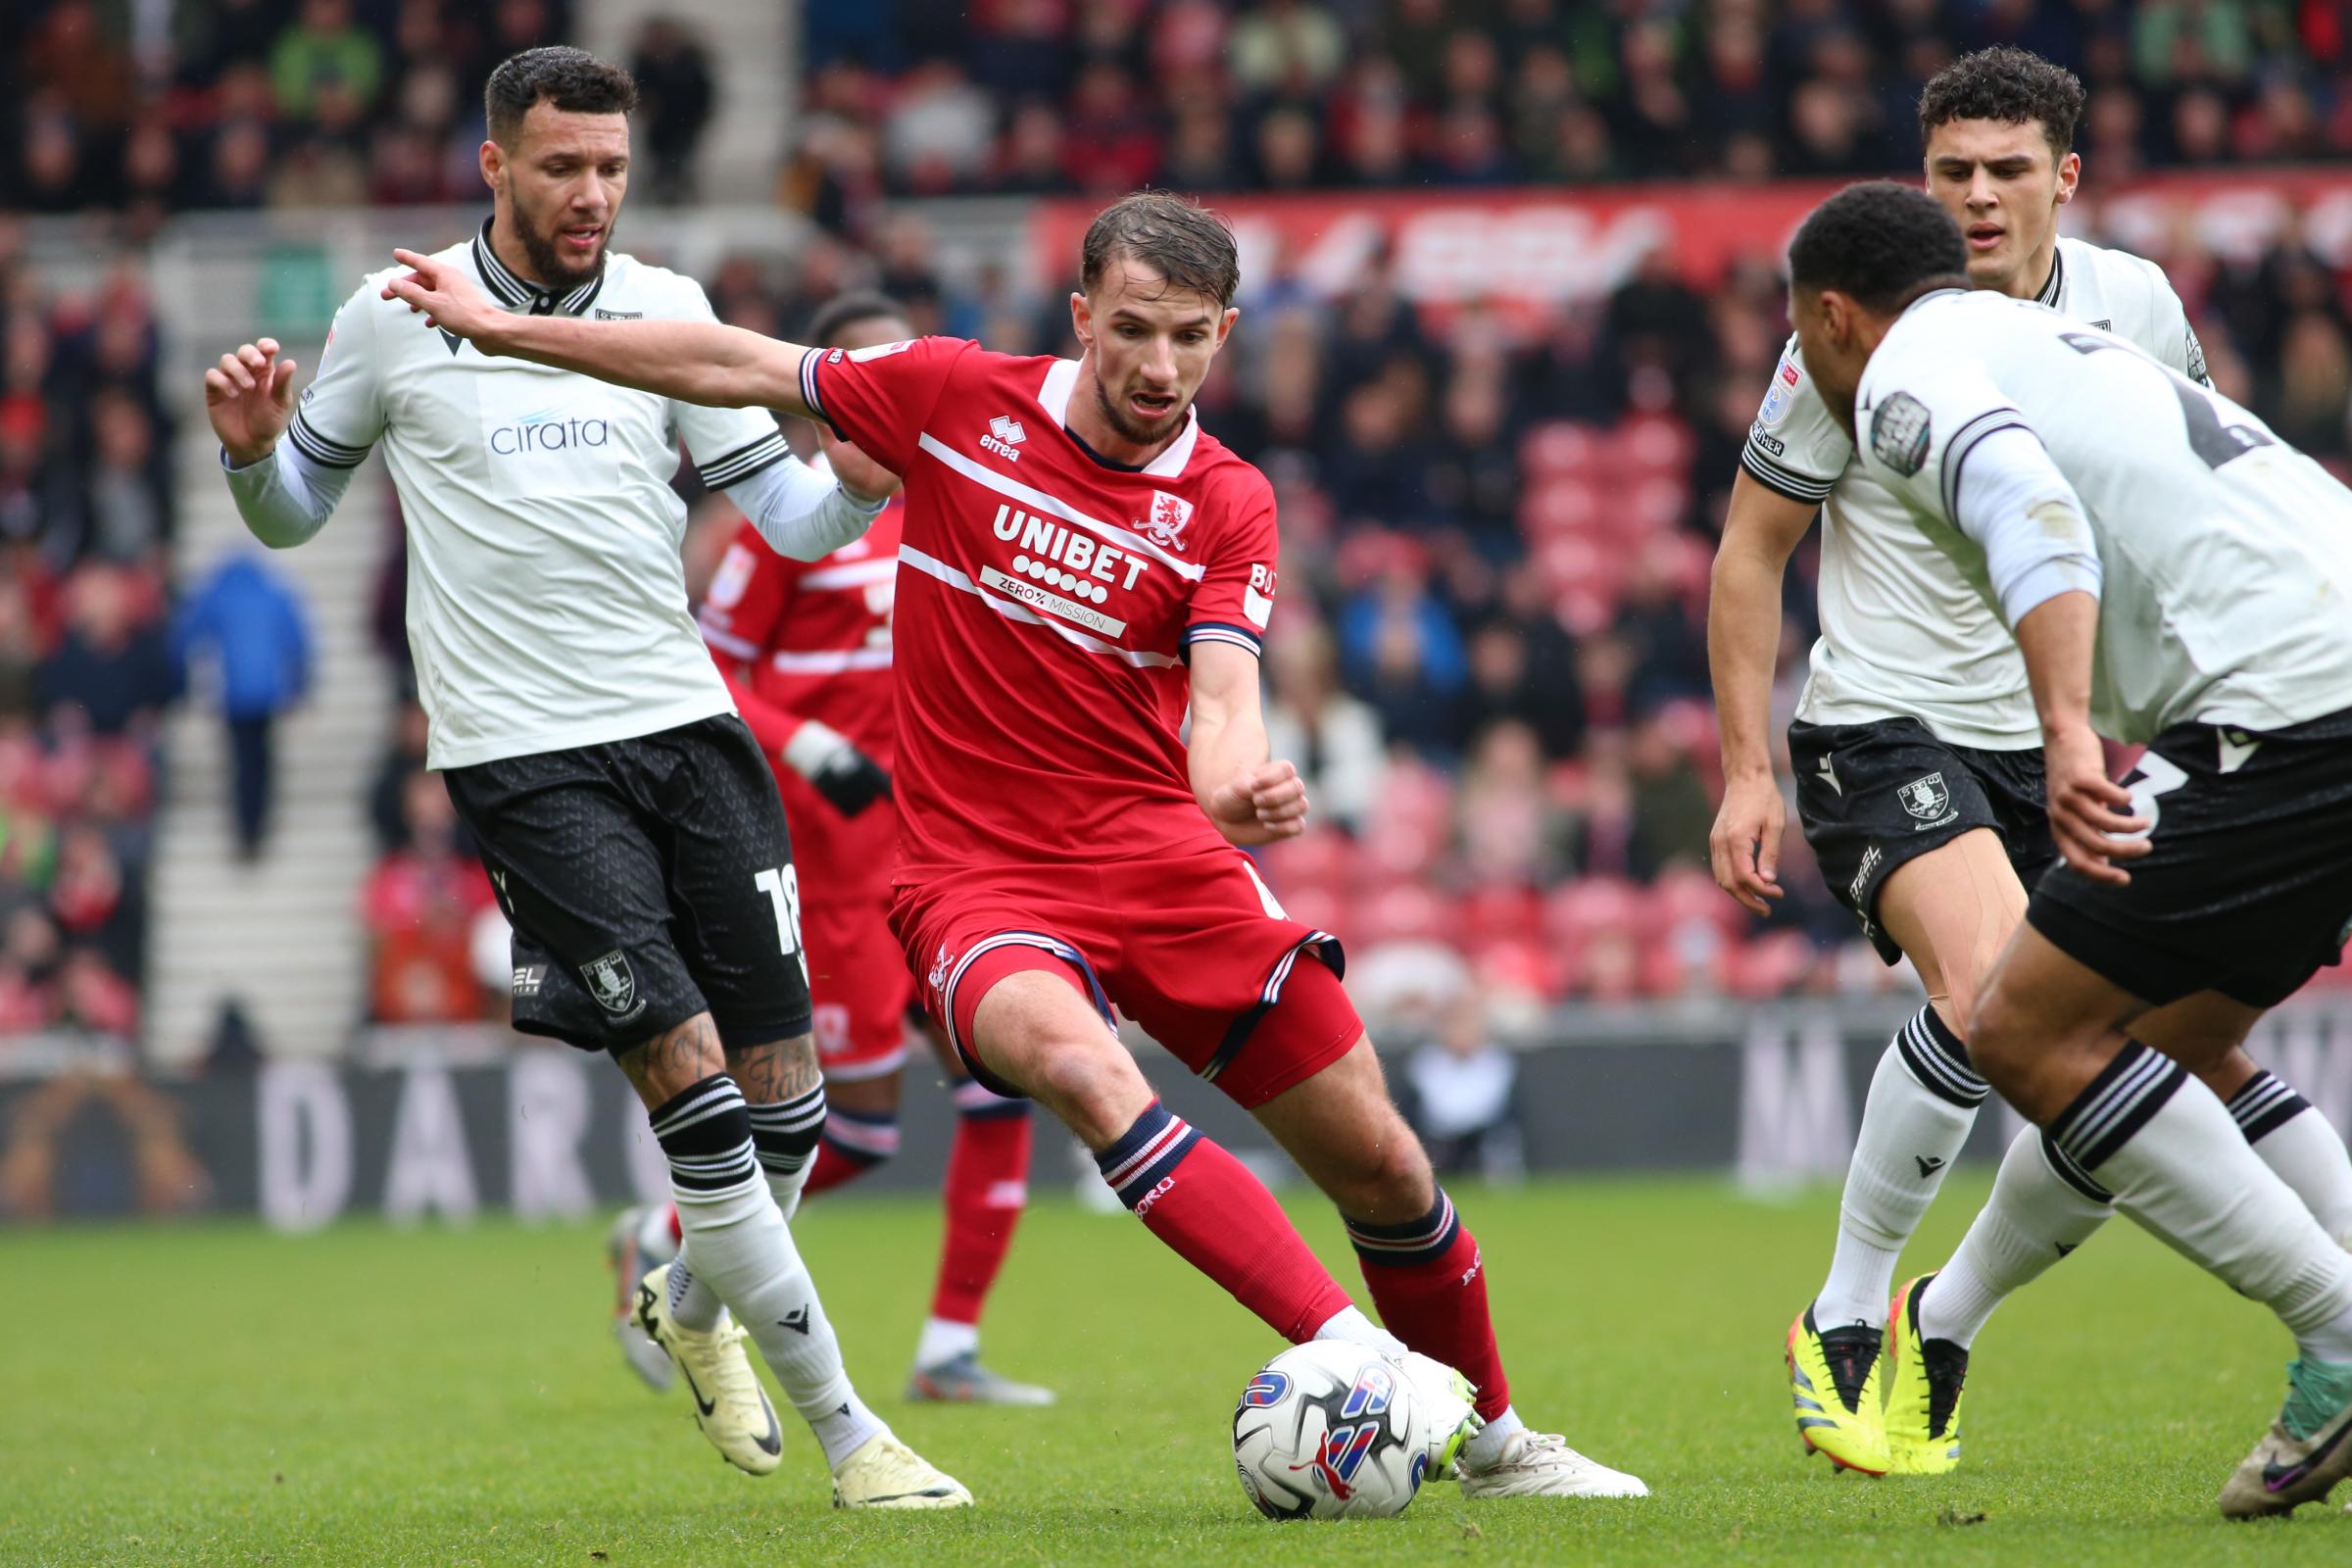 Dan Barlaser is Man of the Match in Middlesbrough win over Sheff Wed